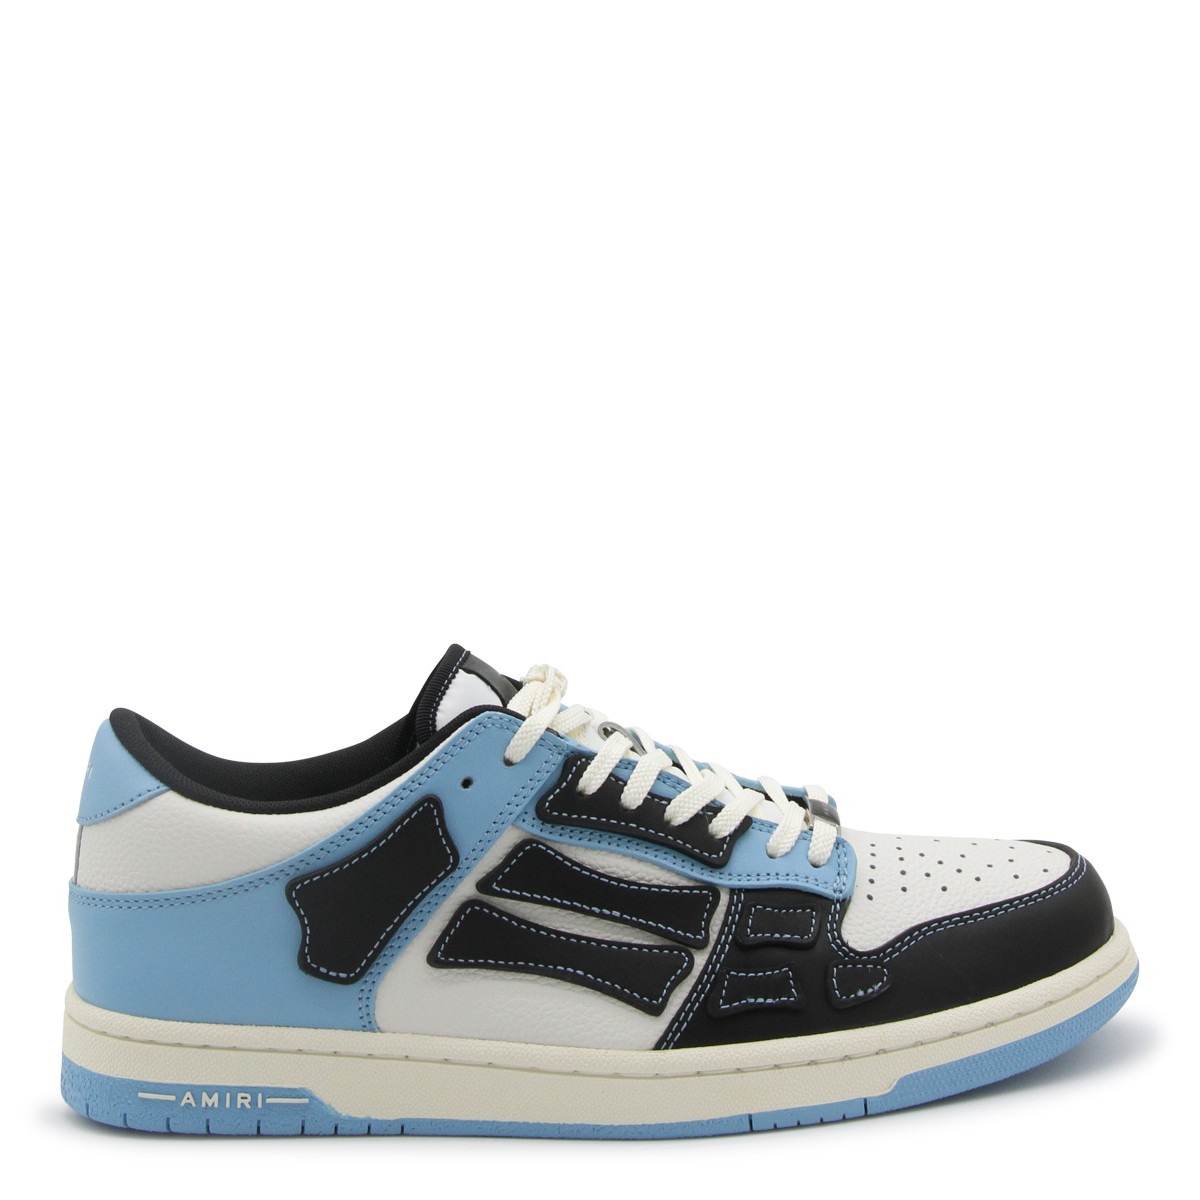 BLACK, WHITE AND LIGHT BLUE LEATHER SNEAKERS